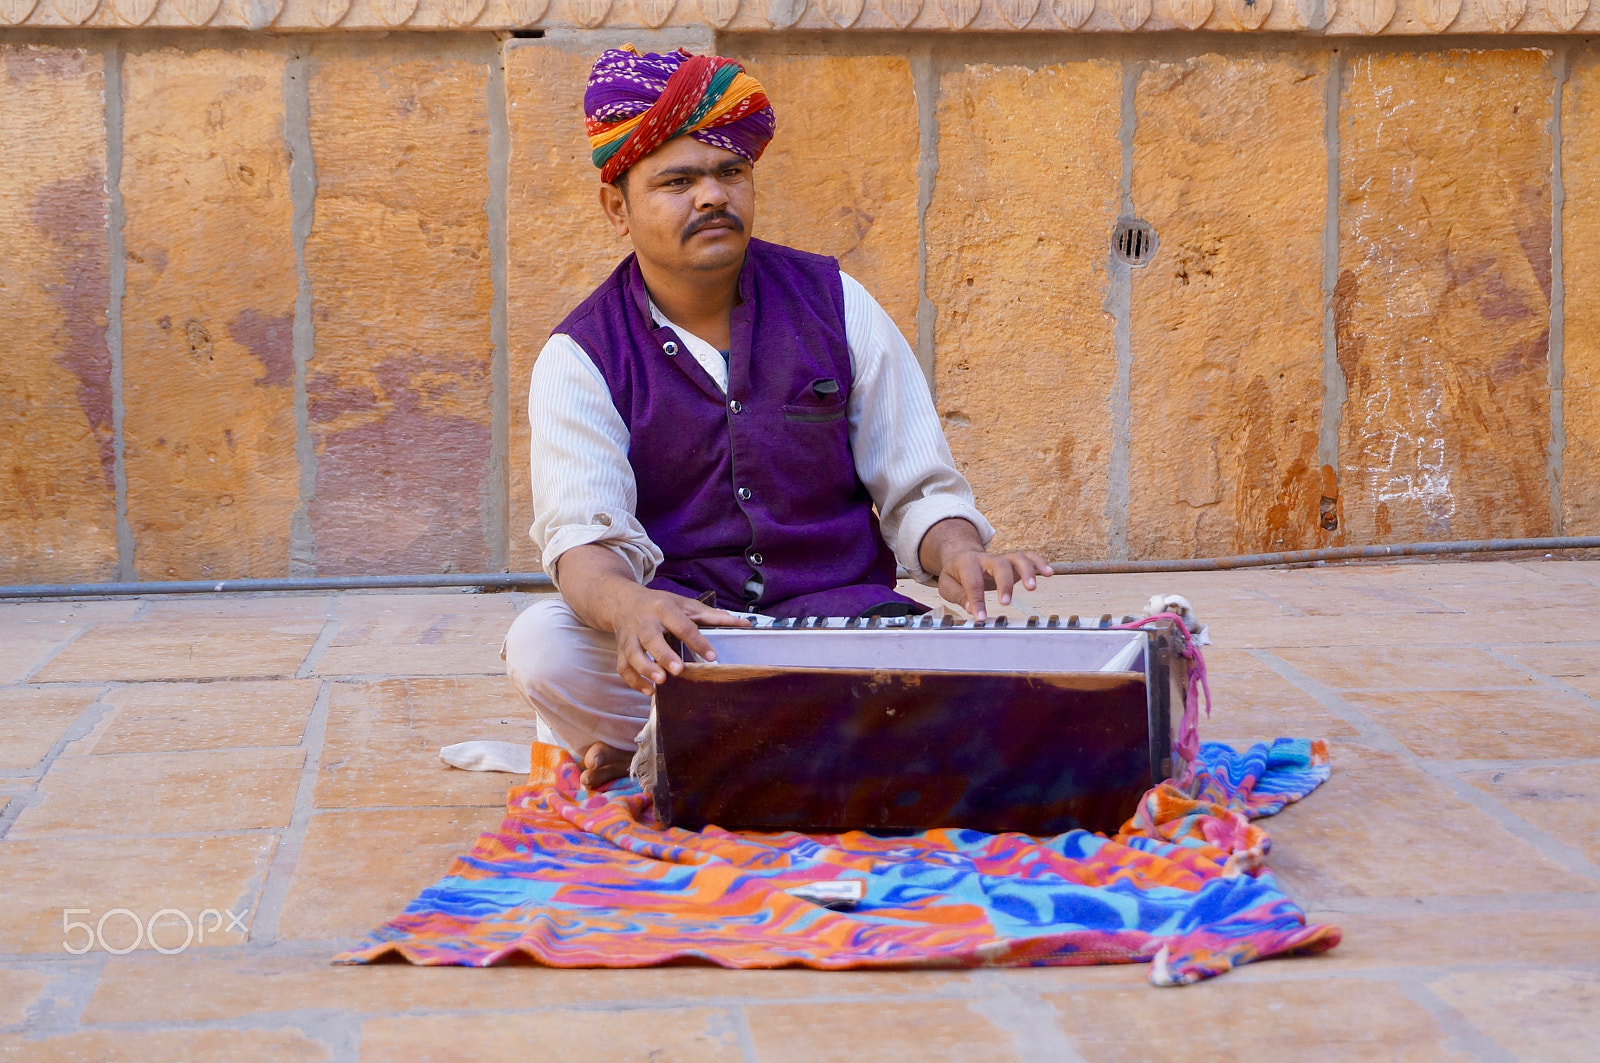 Sony Alpha NEX-5T sample photo. A street musician in rajasthan. photography